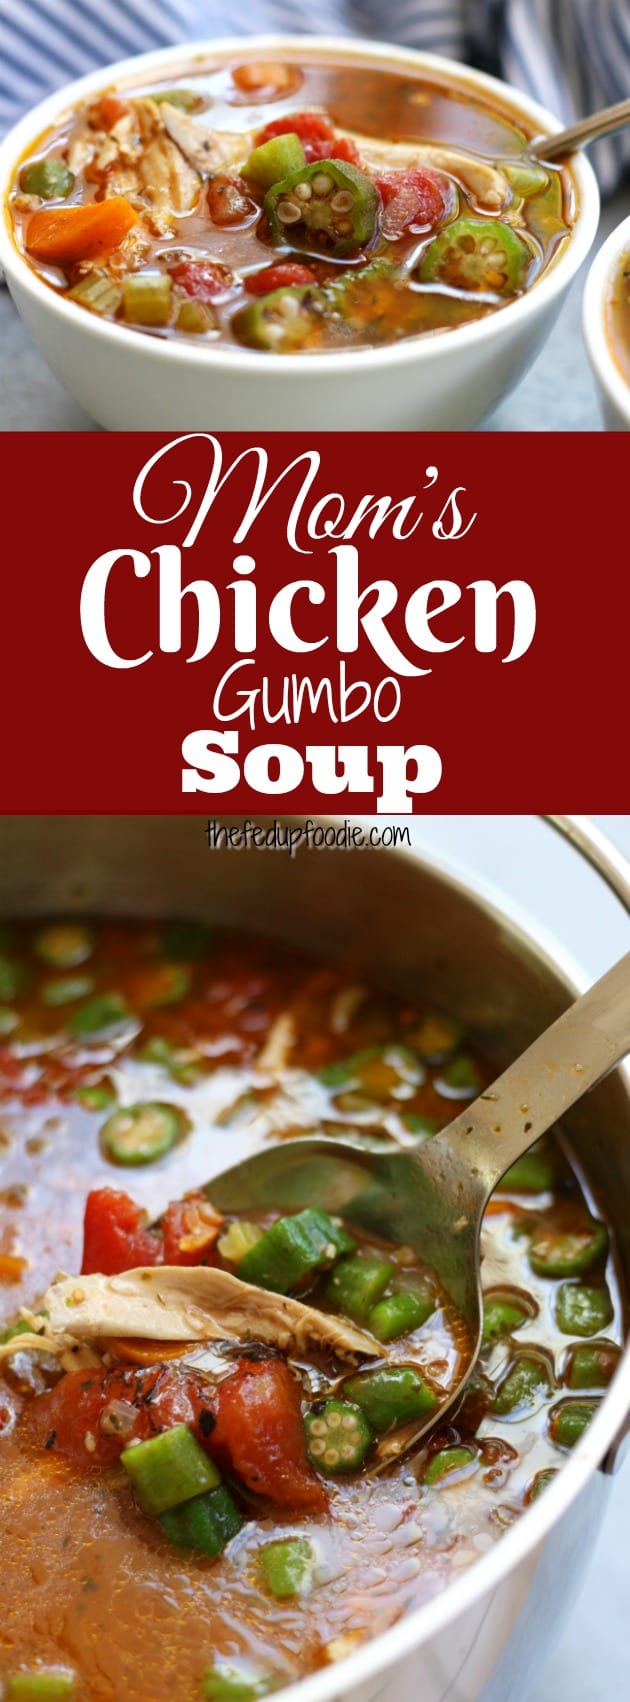 Mom’s Chicken Gumbo Soup recipe~ a hearty, rich soup that warms you from the inside out while fighting off the winter colds and flu. A favorite that brings back sweet memories of childhood and is so satisfying. The best winter soup! https://www.thefedupfoodie.com